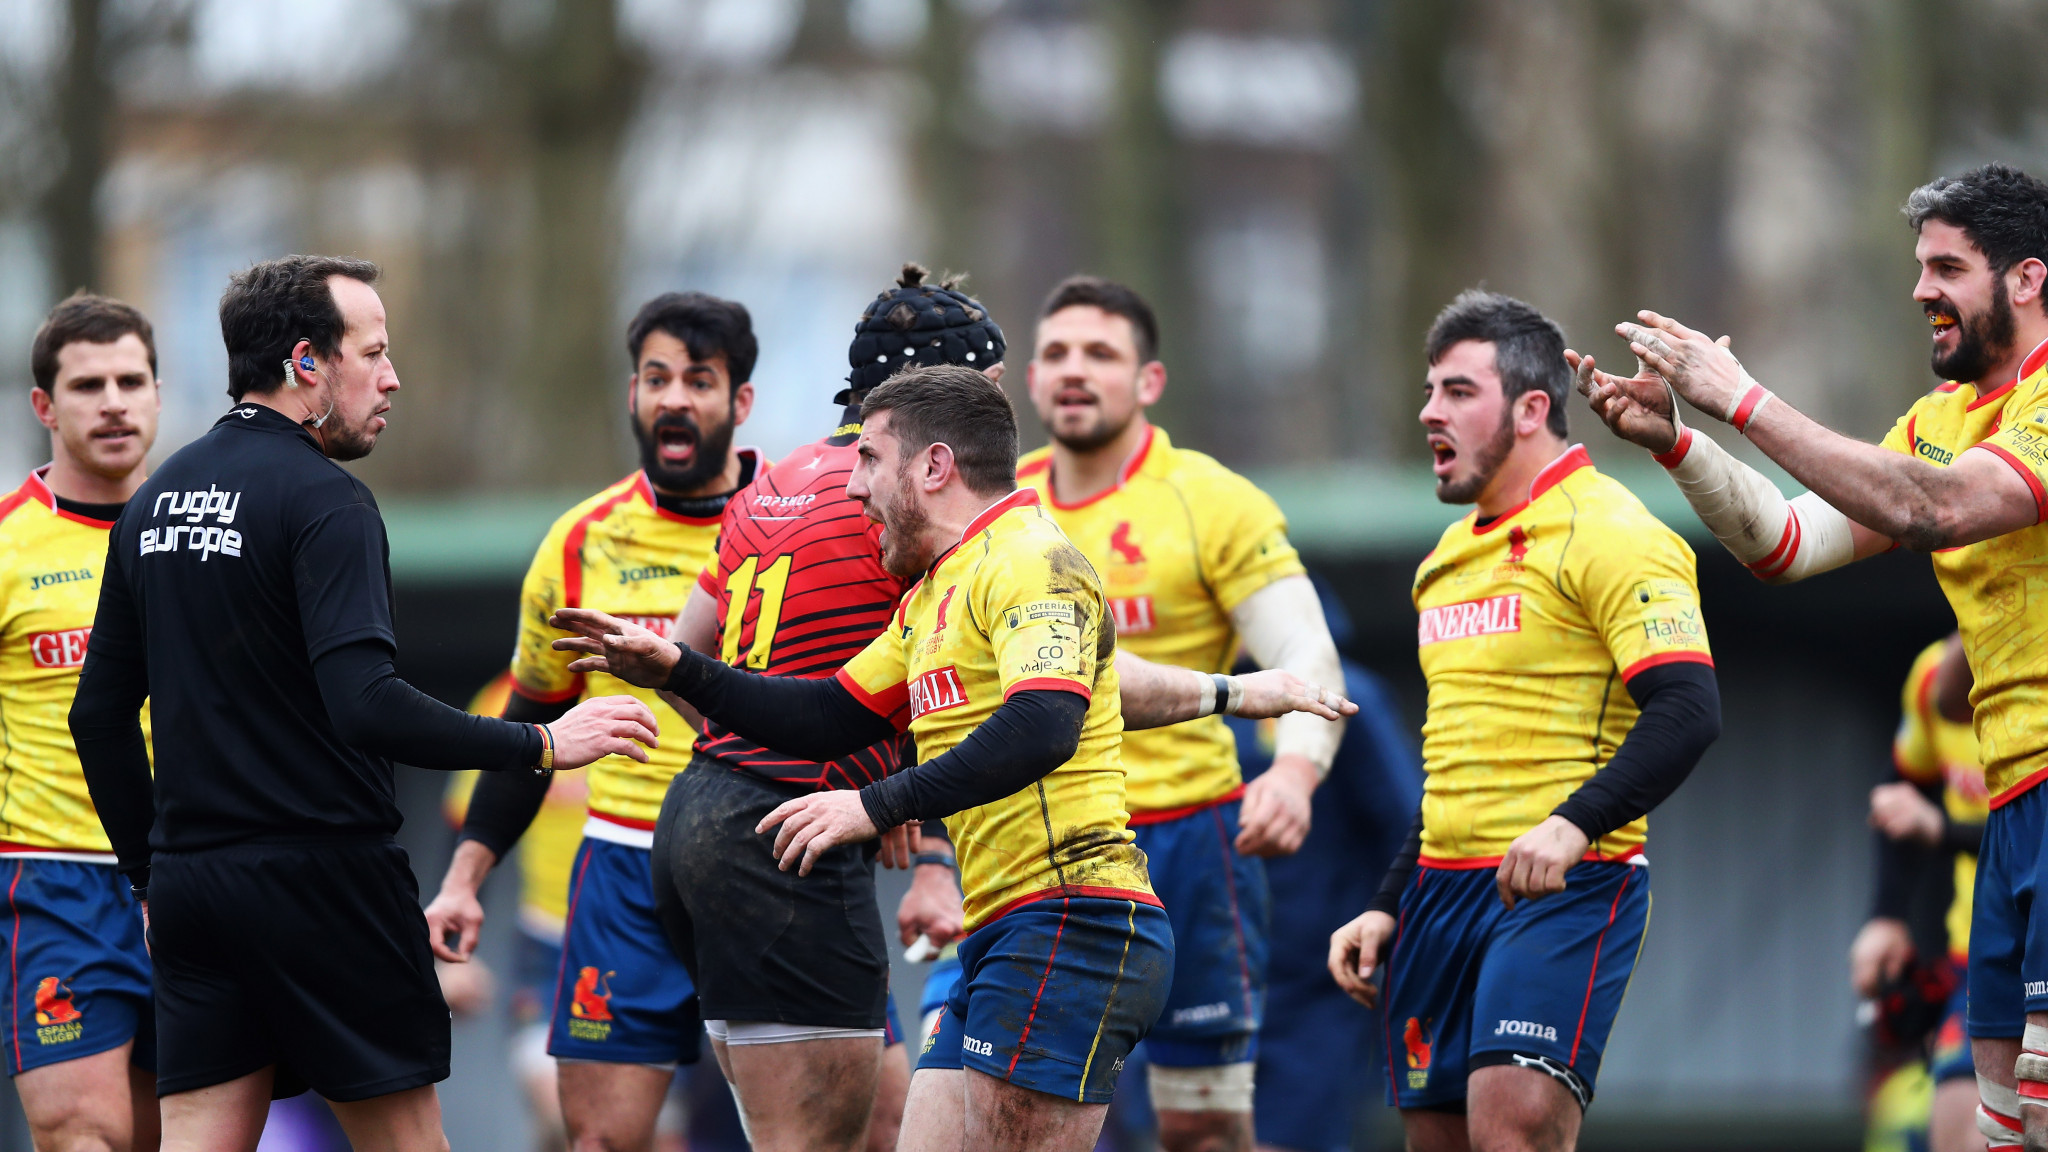 Spanish Rugby Federation call for controversial Belgium match to be replayed as formal complaint lodged